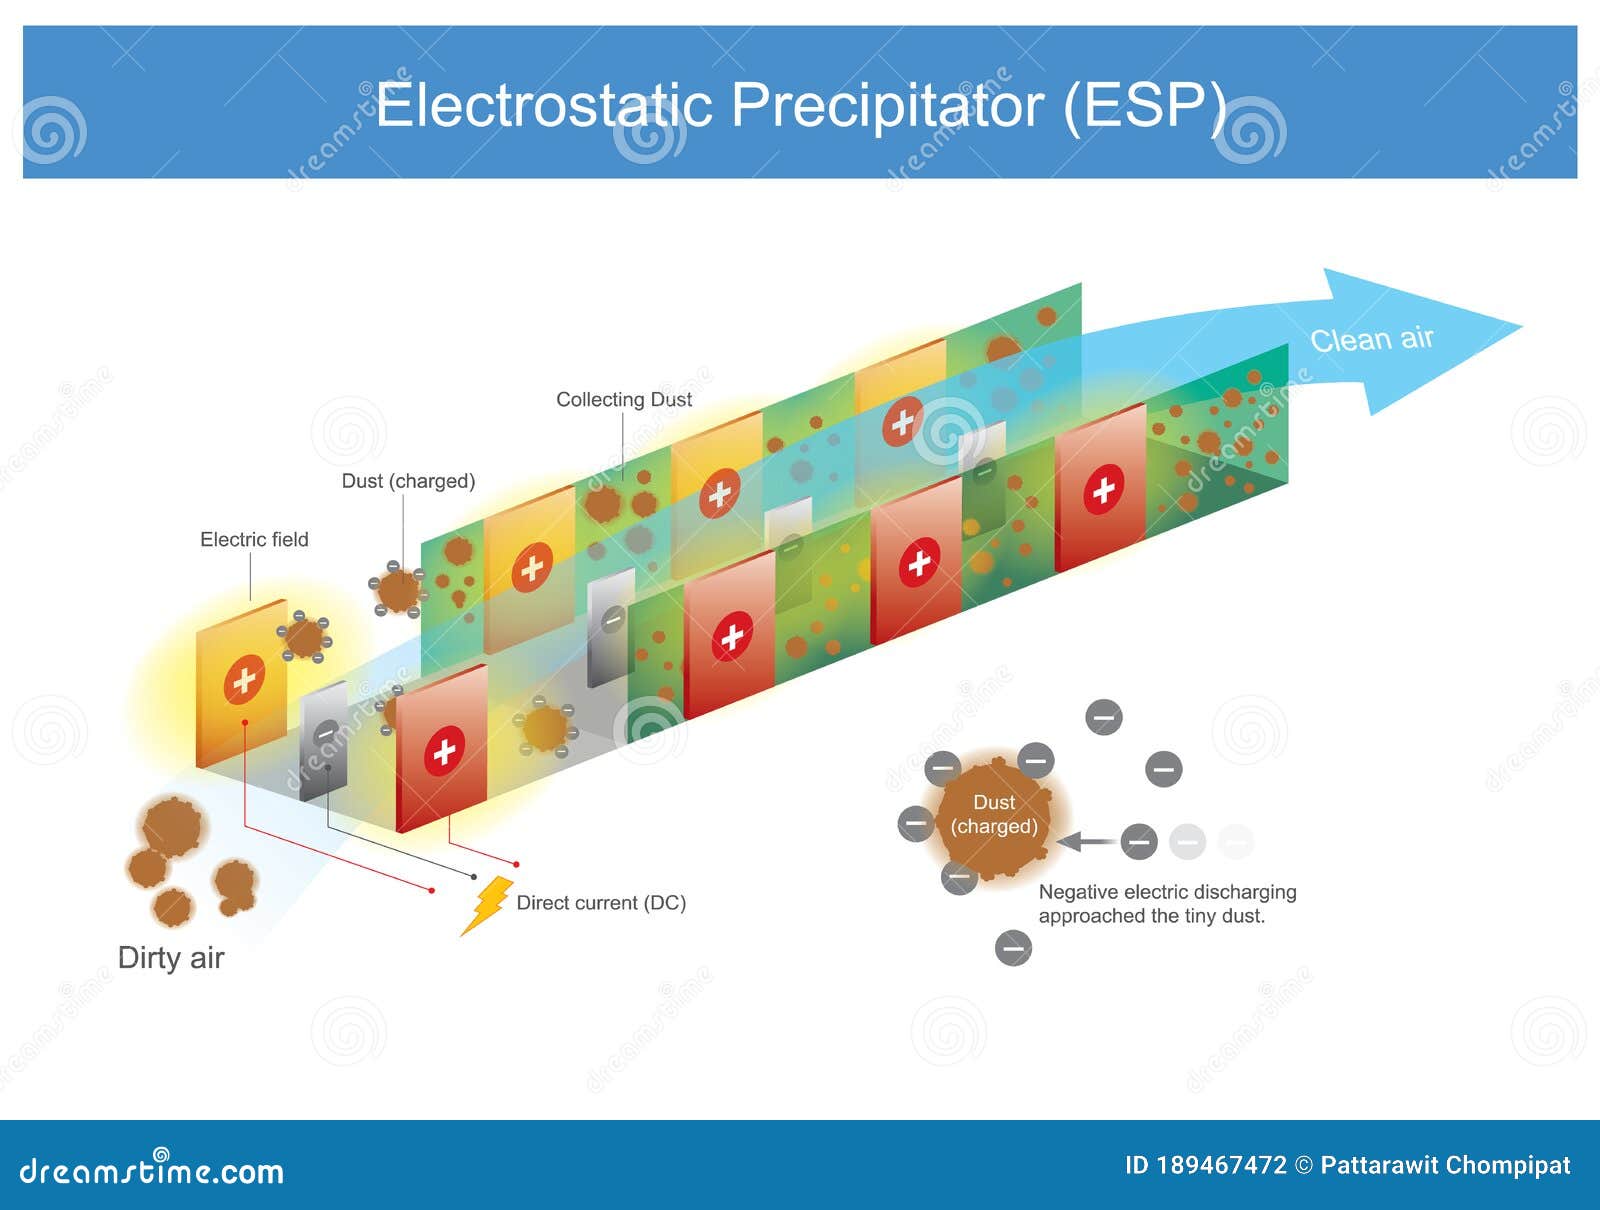 electrostatic precipitator.  use for explain principle release of negative charges to trap tiny dust